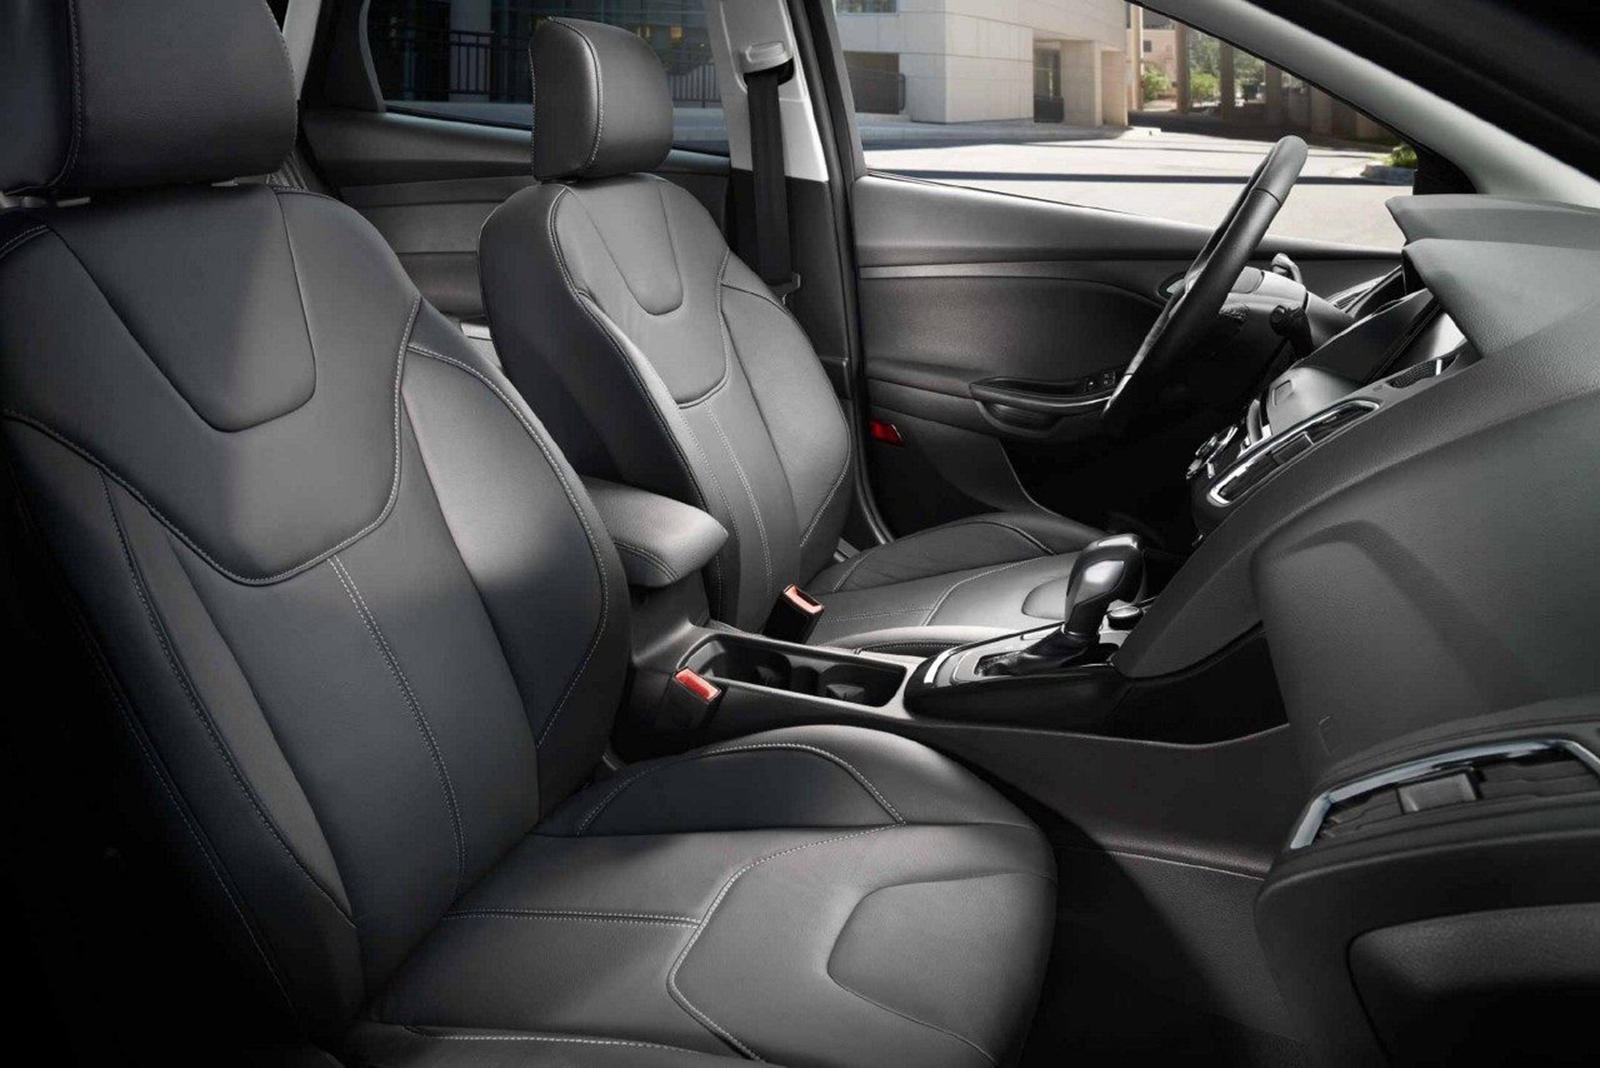 Seats left. Ford Focus St 2015 Black салон. Charcoal Black Форд фокус 3 салон. Front Seat.